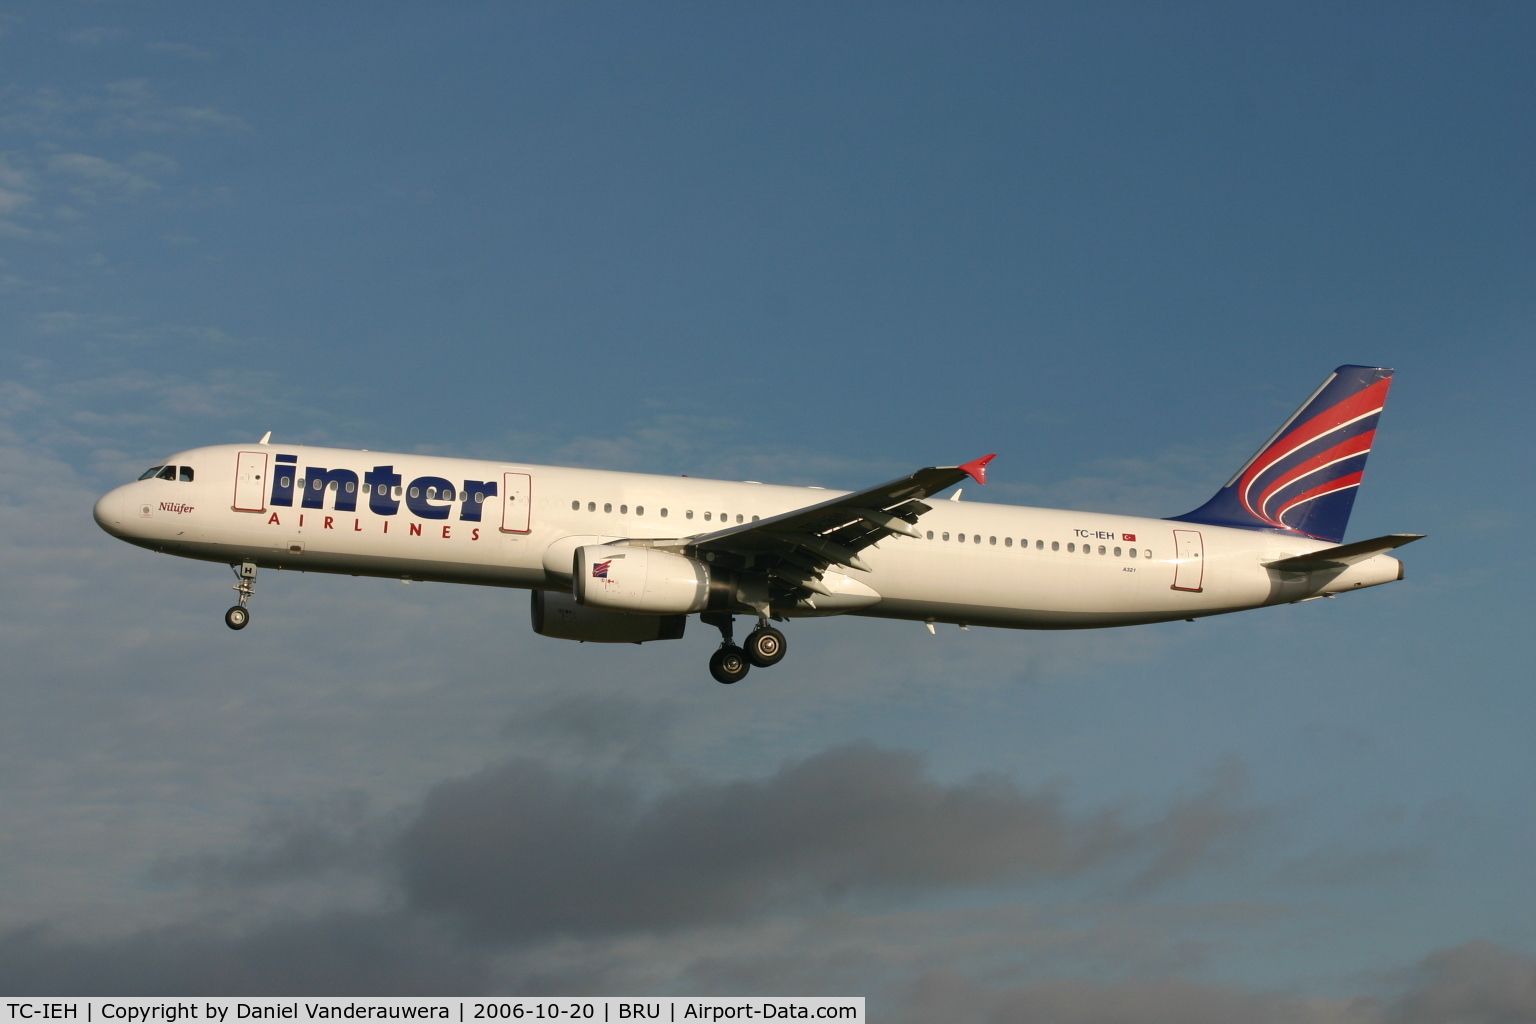 TC-IEH, 1999 Airbus A321-131 C/N 963, arrival of flight INX572 from Antalya